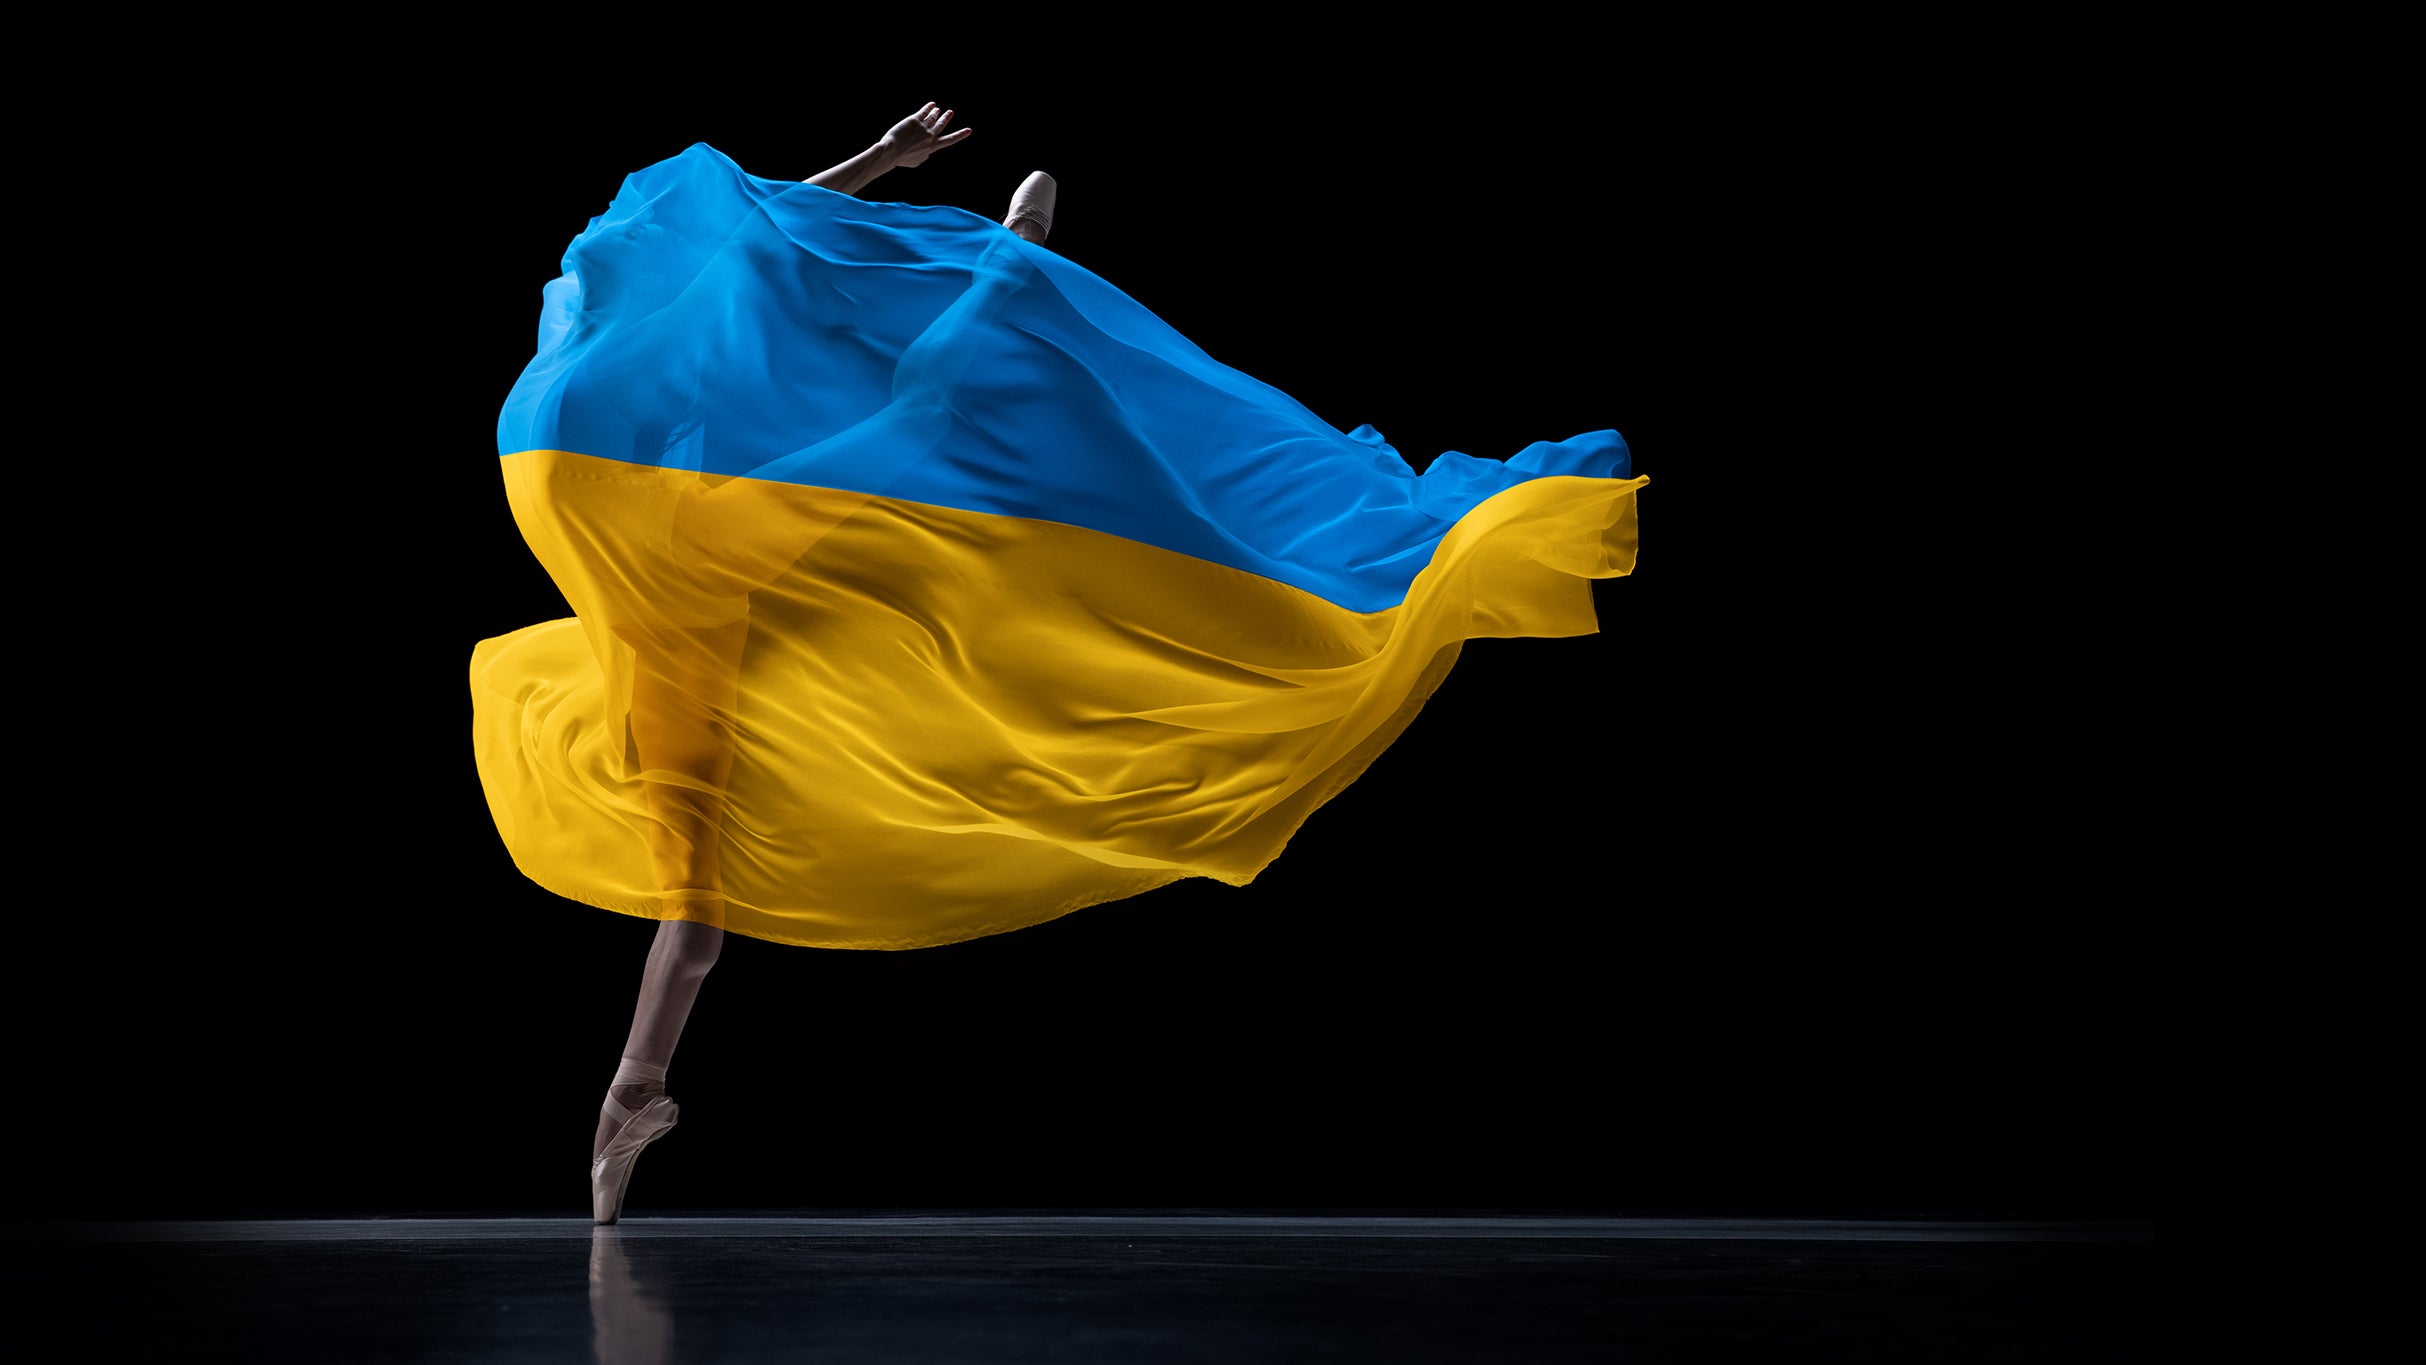 National Ballet Of Ukraine in Vancouver promo photo for Boxing Day Promo presale offer code